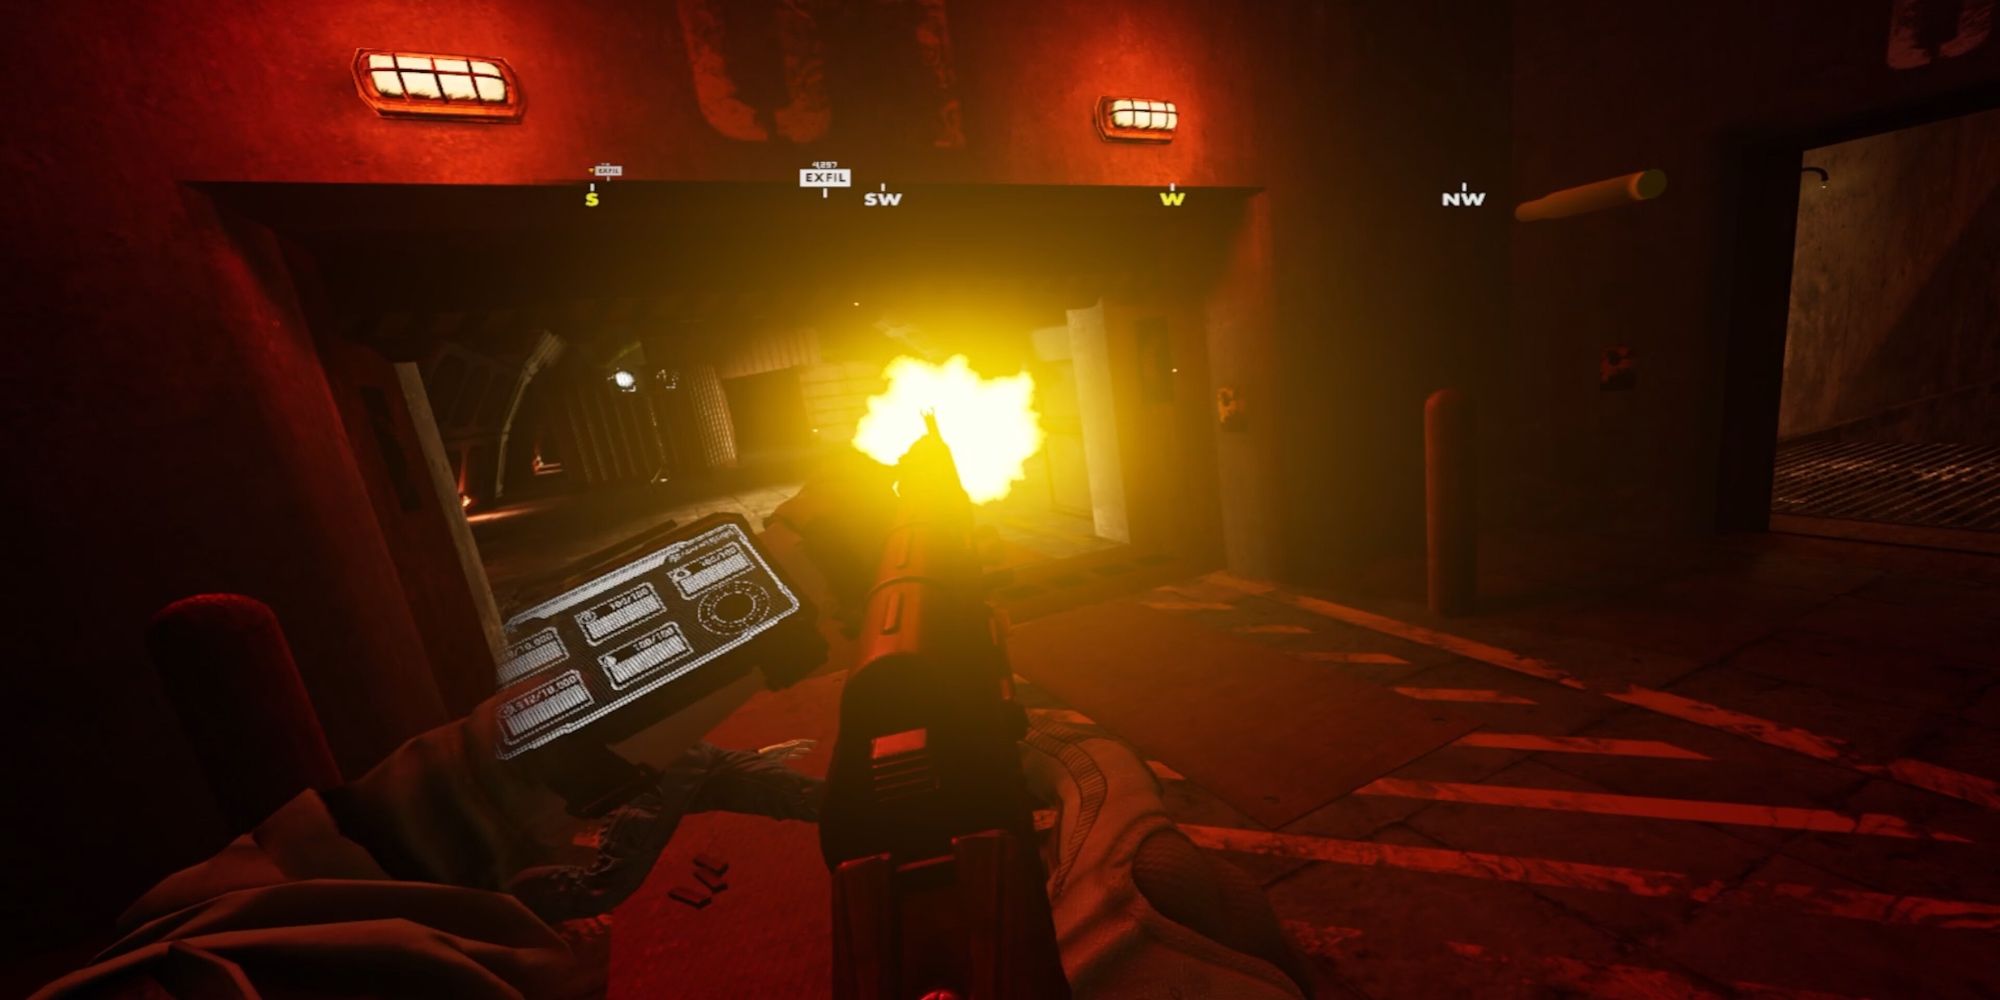 Player bursts fire at enemy soldiers using an assault rifle